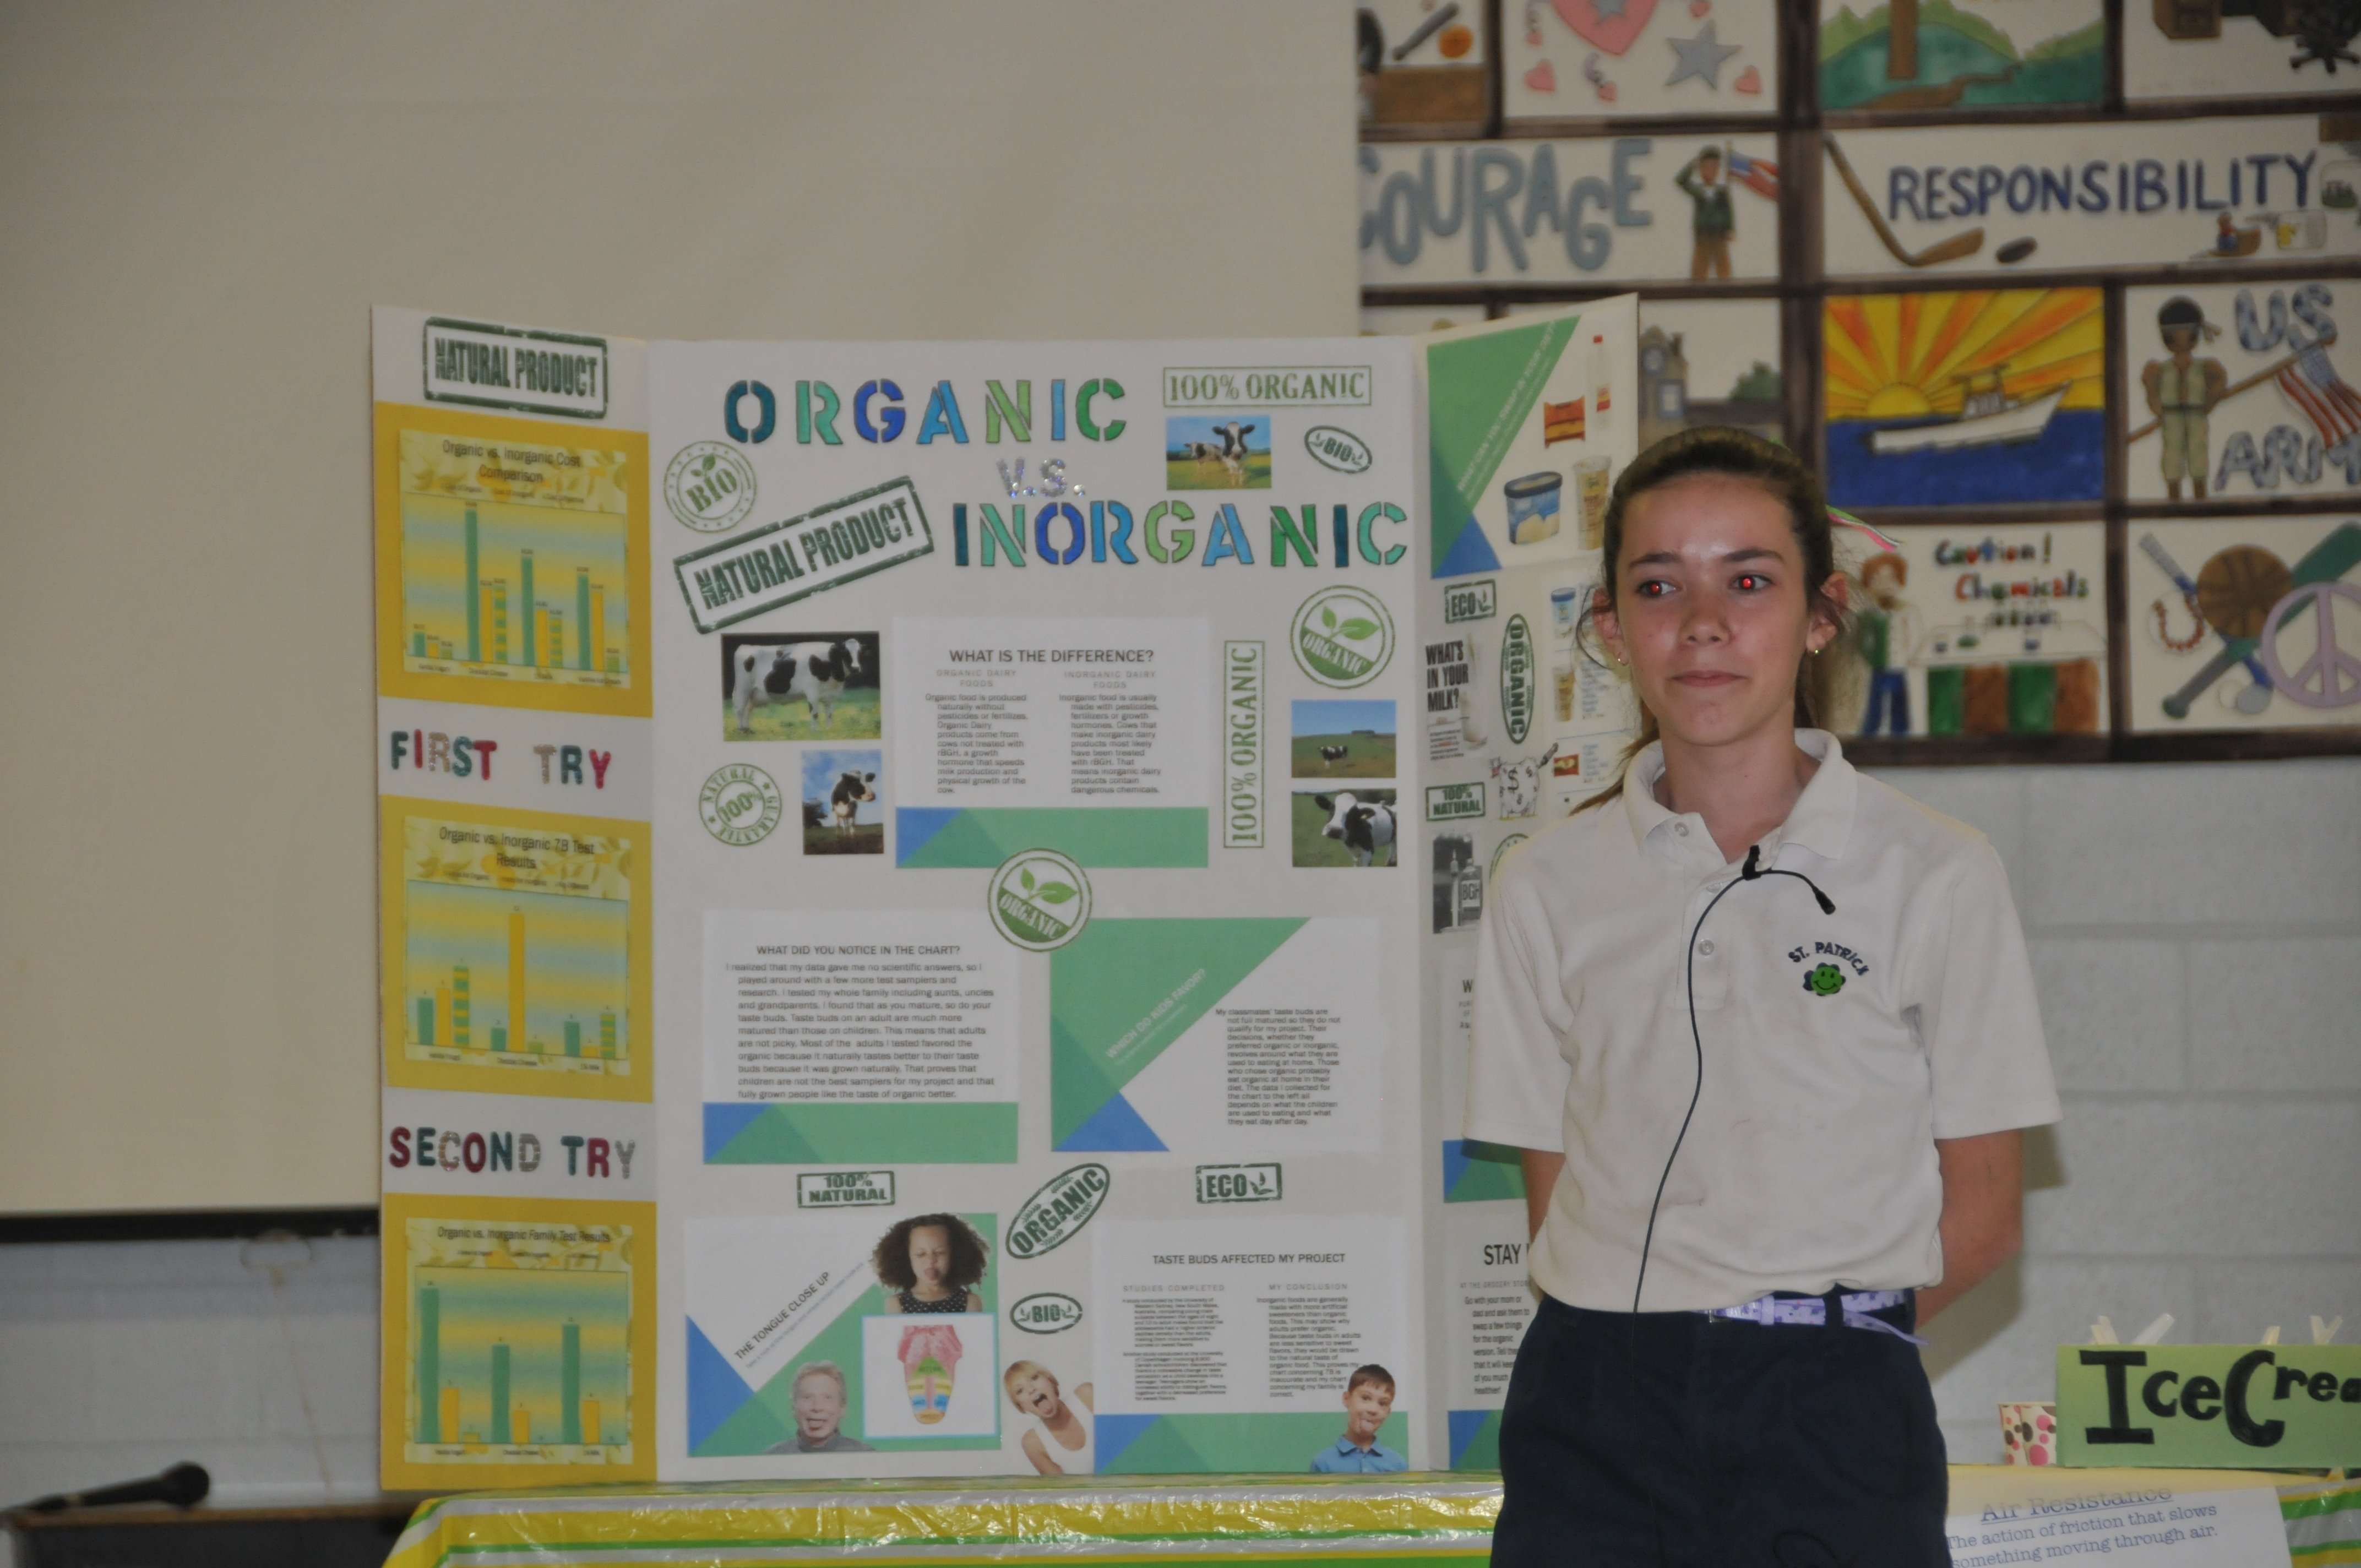 10 Amazing 9Th Grade Science Fair Ideas science projects org coursework academic writing service qdessaycdka 7 2022